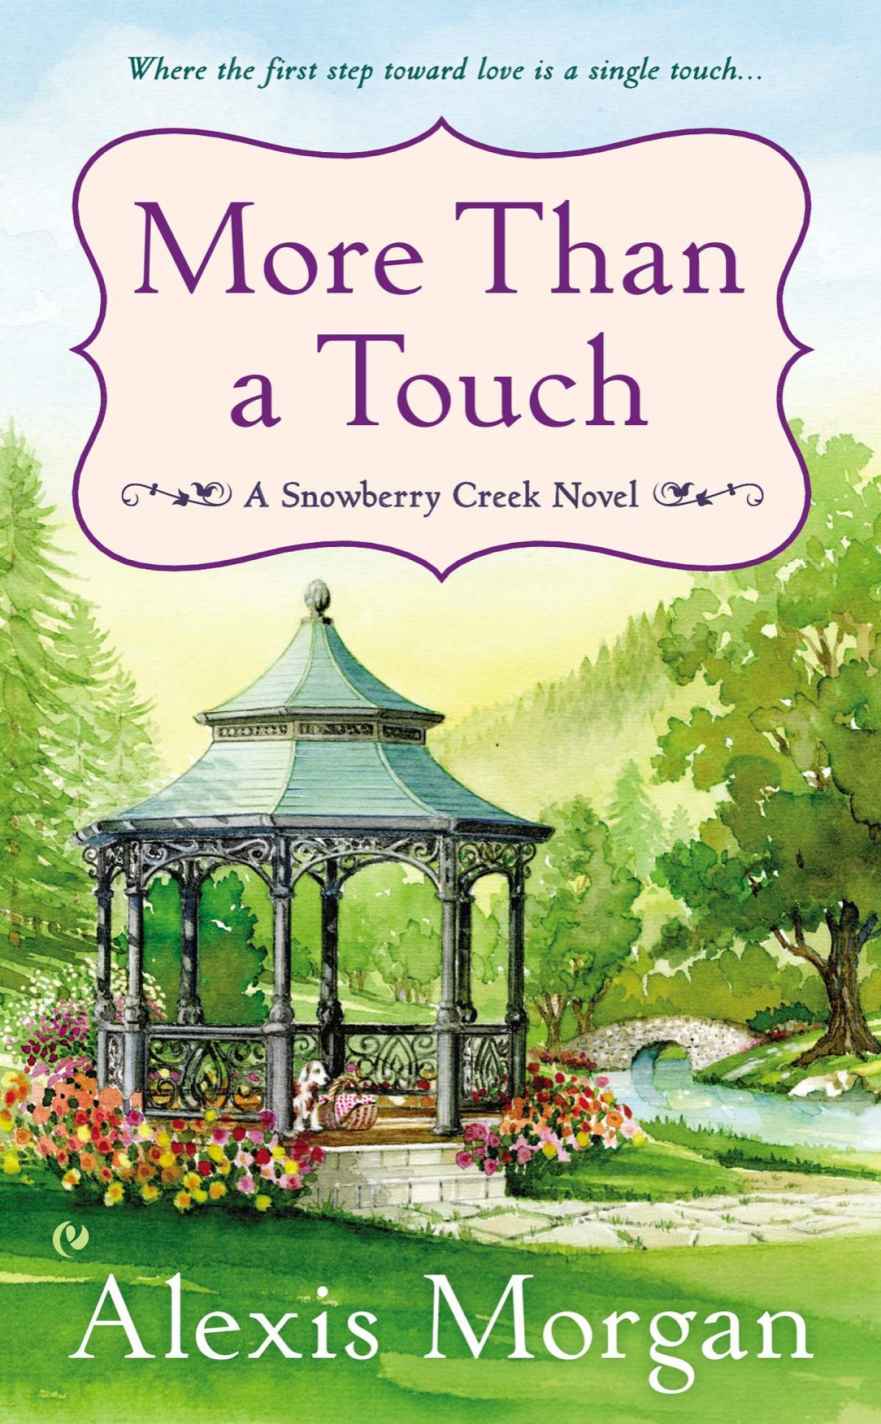 More Than a Touch (Snowberry Creek #2) by Alexis Morgan